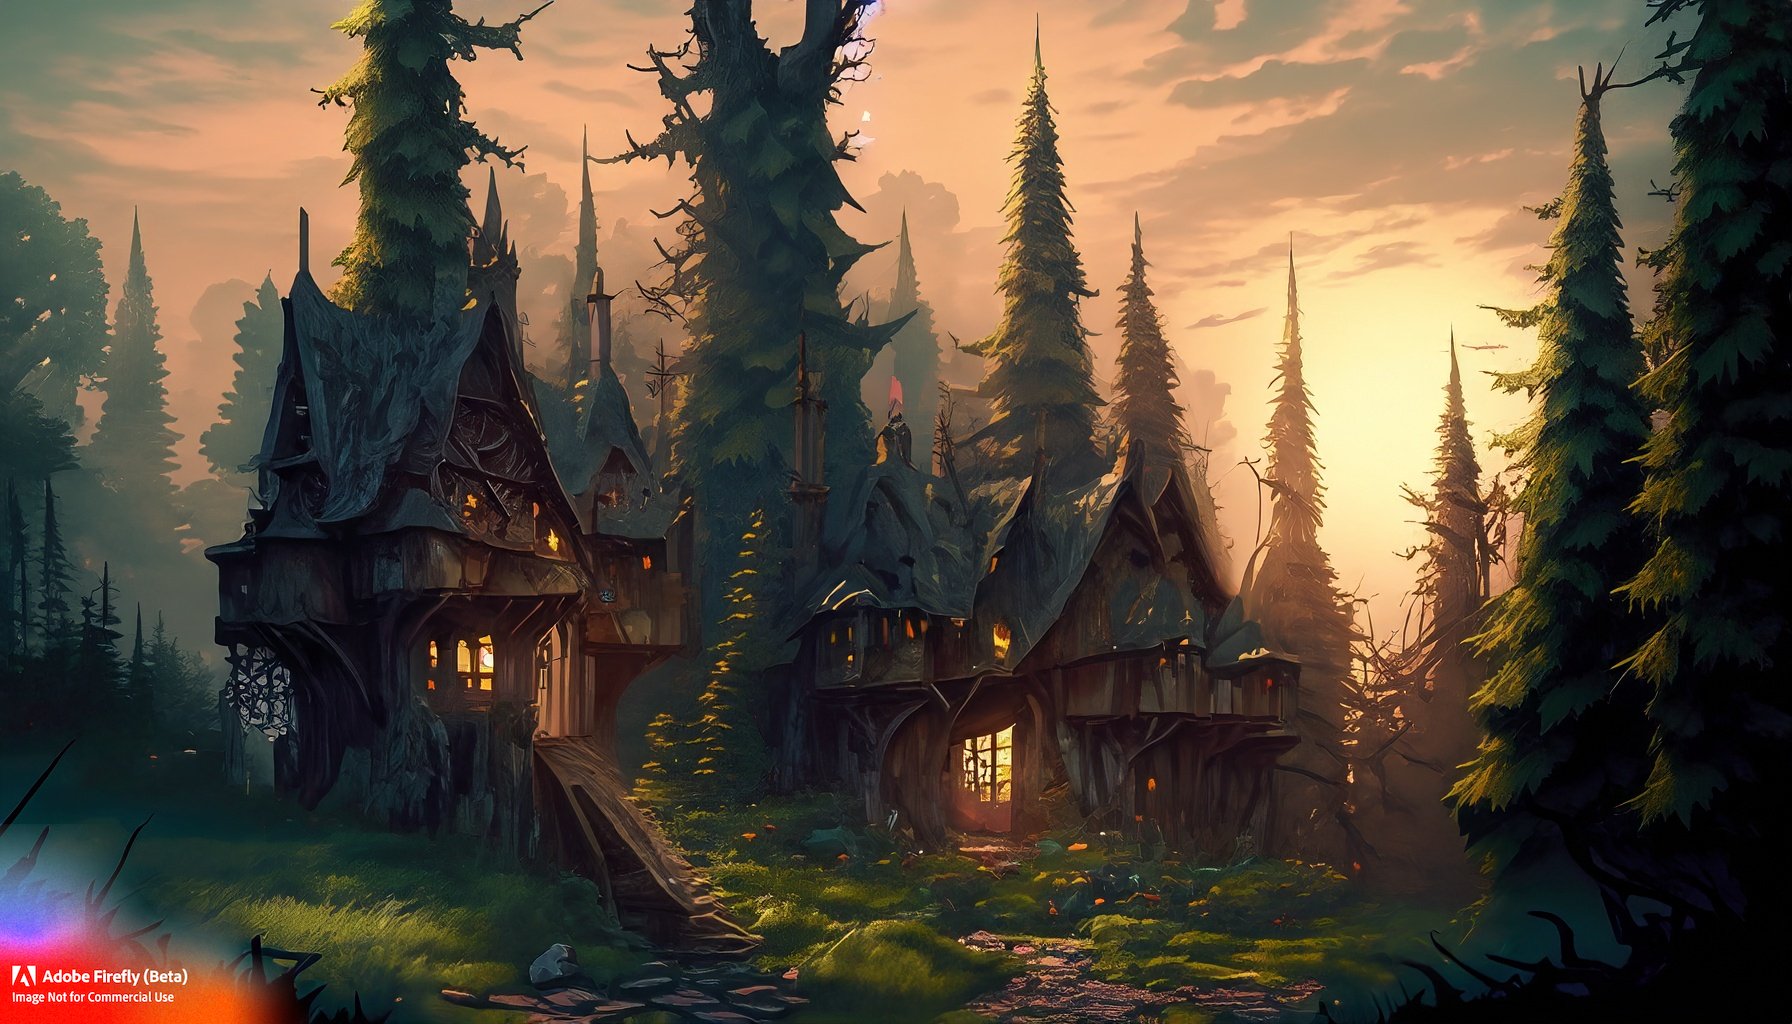 Firefly_mistward,+fae outpost of buildings deep in the woods, surrounded by tall evergreens, at sunset_art,wide_angle_44916.jpg